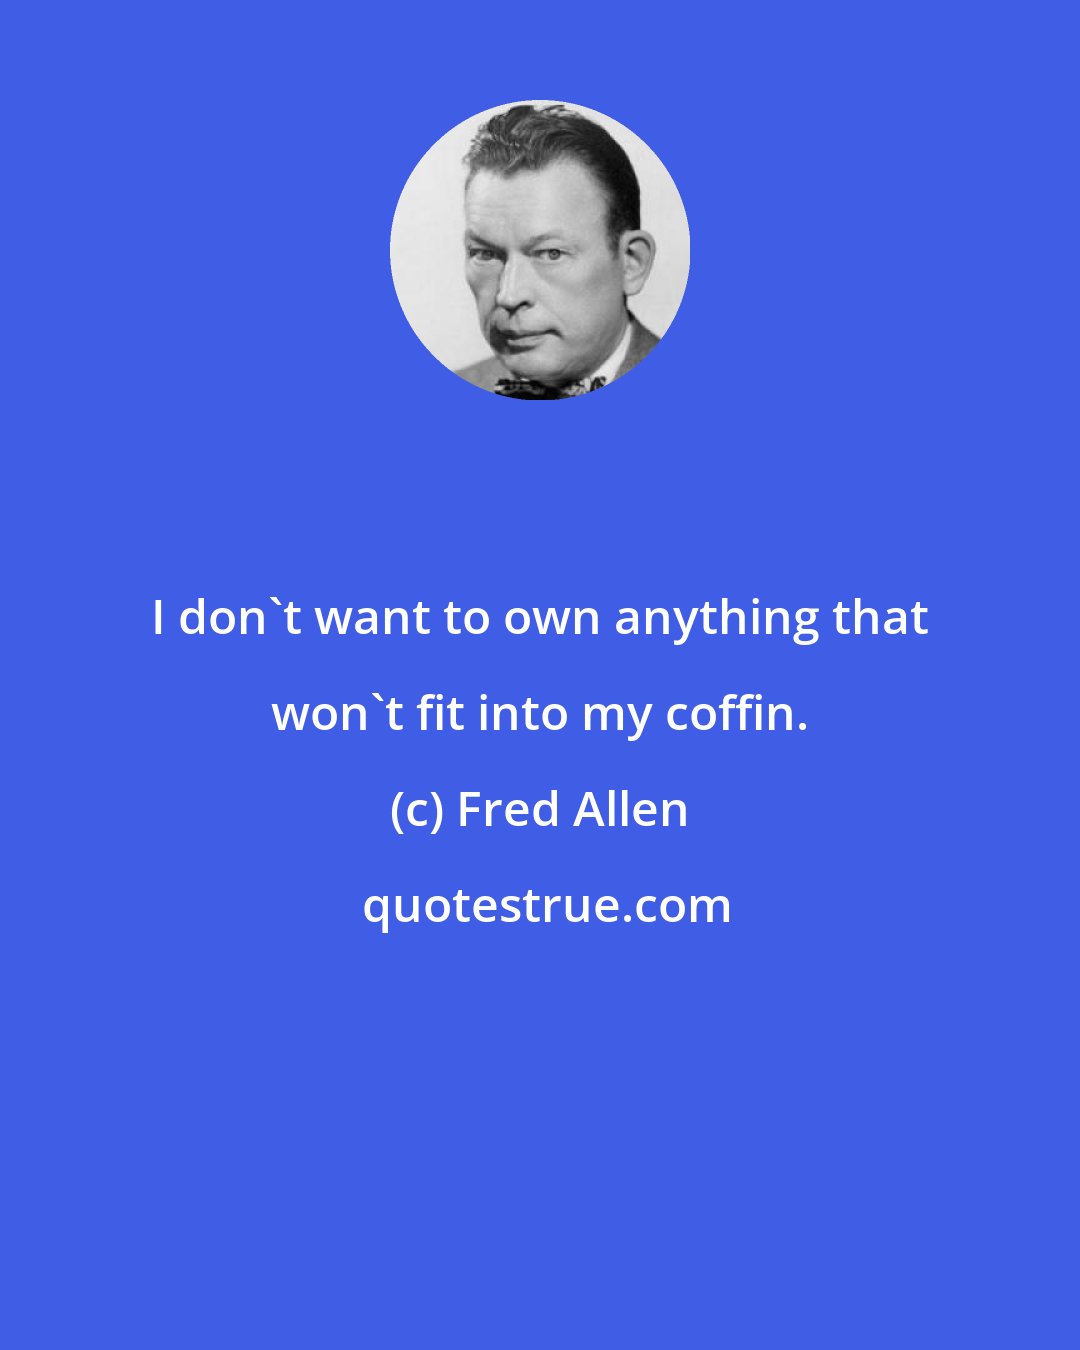 Fred Allen: I don't want to own anything that won't fit into my coffin.